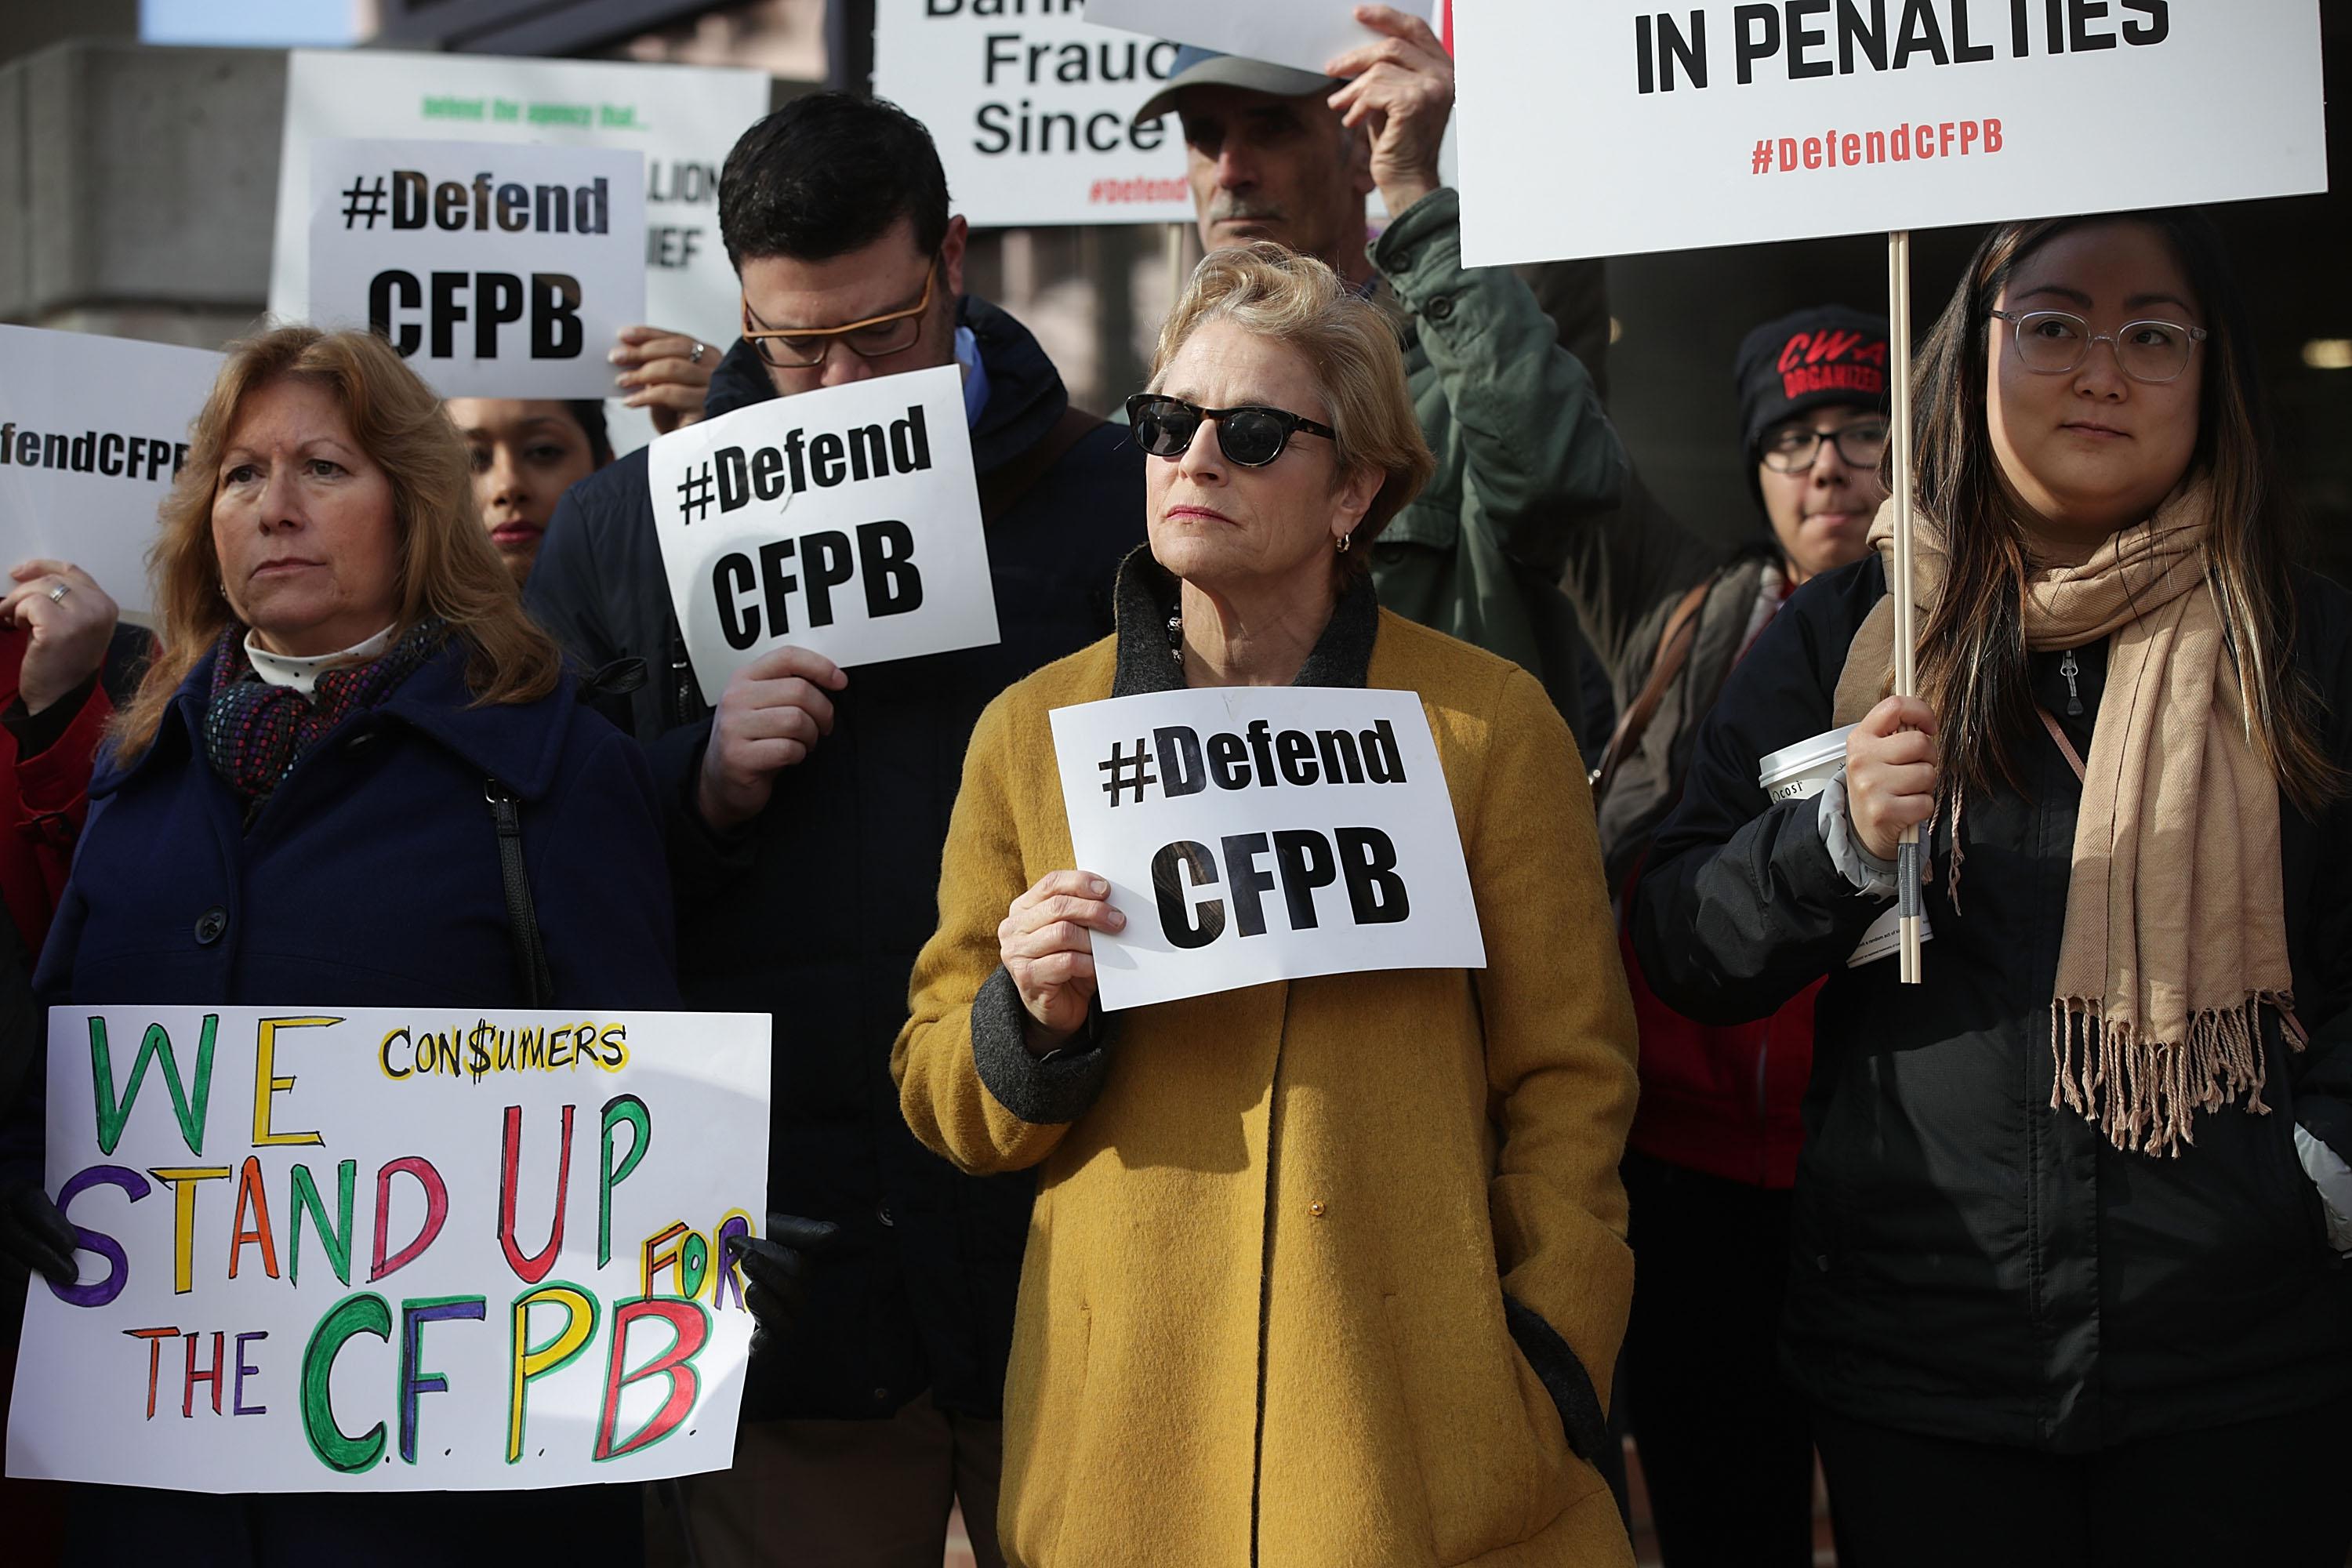 WASHINGTON, DC - NOVEMBER 27:   Supporters of the Consumer Financial Protection Bureau hold signs as they gather in front of the agency November 27, 2017 in Washington, DC. President Trump has picked White House Budget Director Mick Mulvaney as the acting director after former director Richard Cordray stepped down and named his chief of staff Leandra English as acting director, setting up a possible court battle over who will lead the agency.  (Photo by Alex Wong/Getty Images)